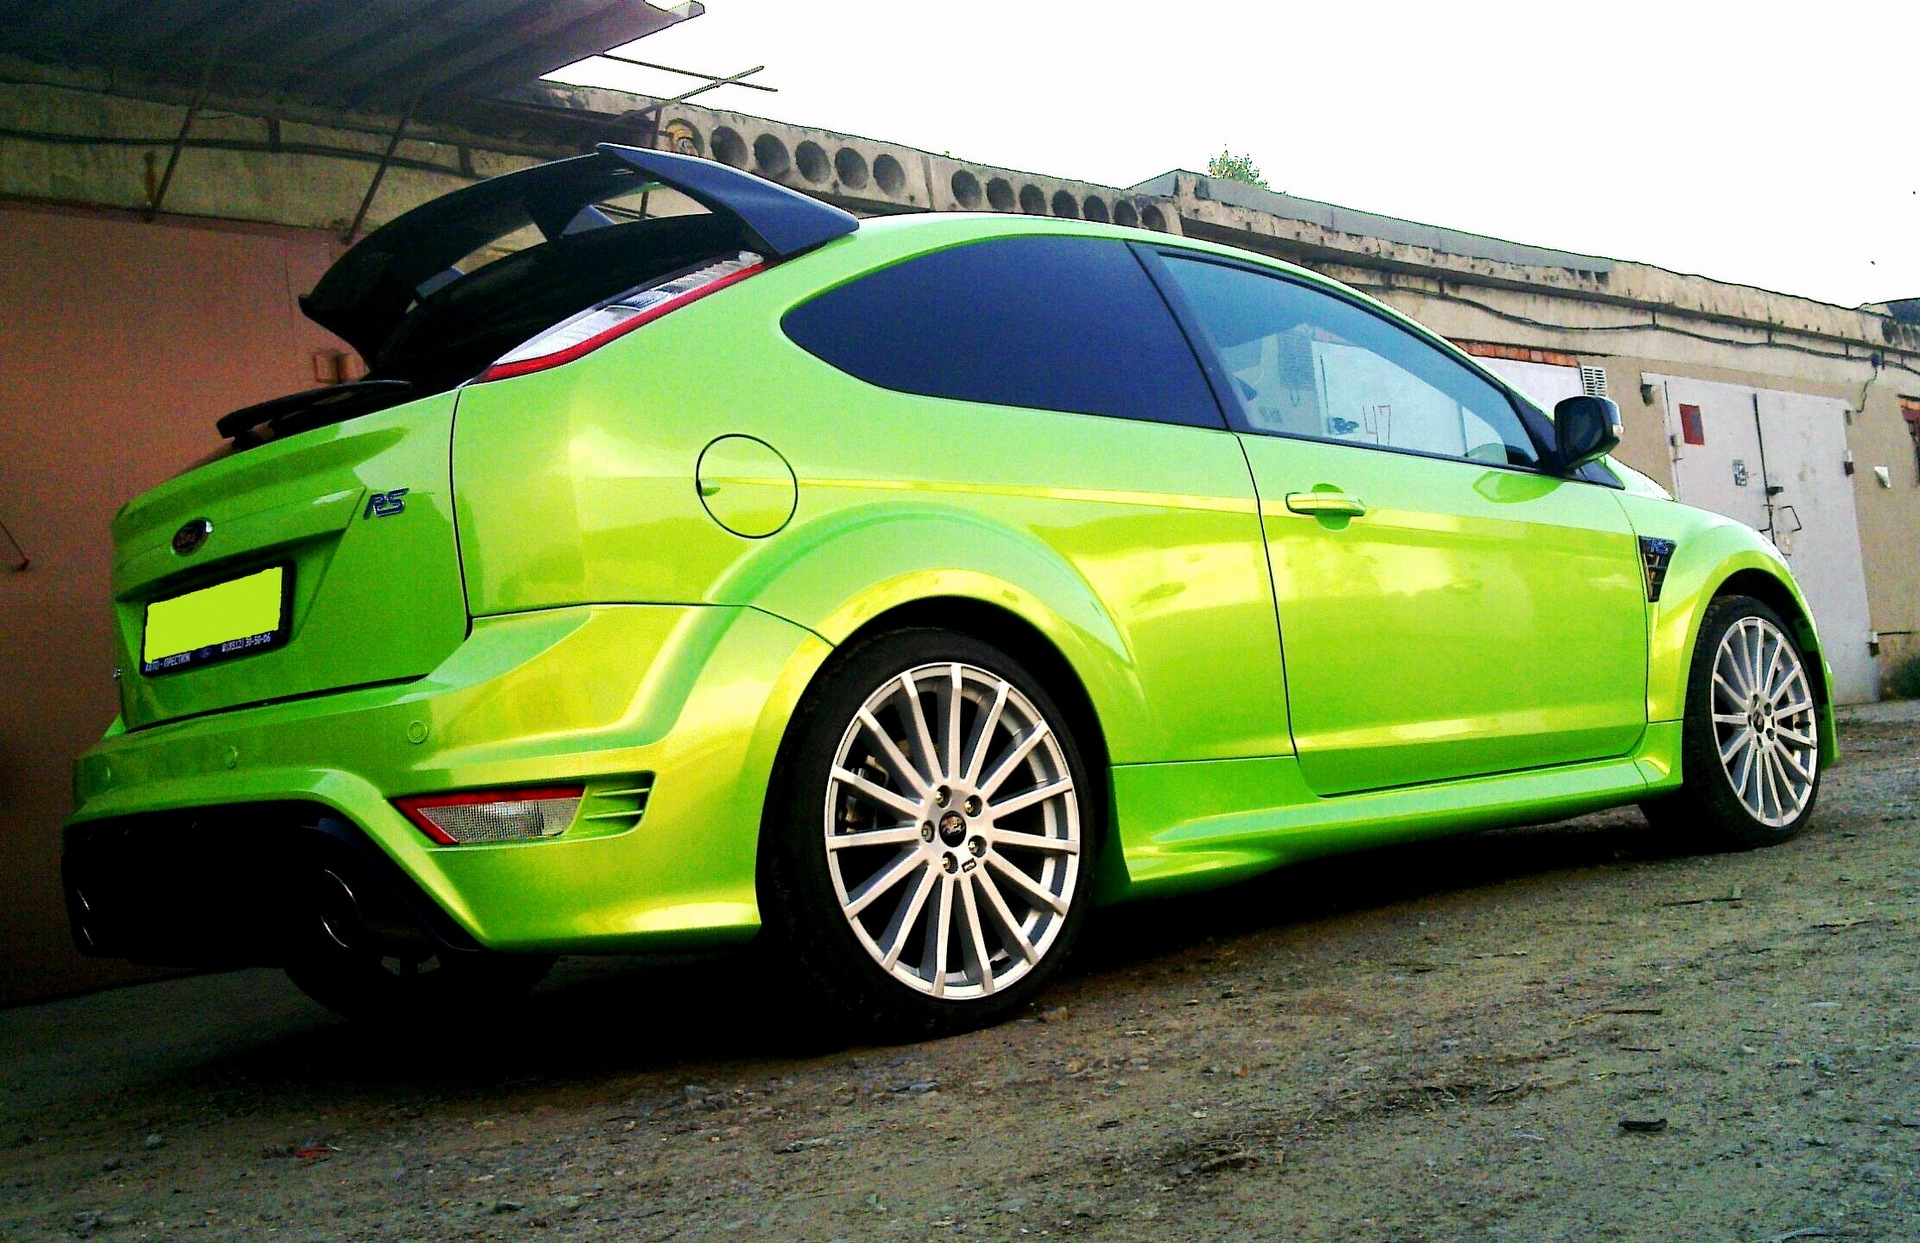 Ford focus цвет. Ford Focus 2 RS. Форд фокус 2 РС. Ford Focus 2 RS красный. Форд фокус 2 хамелеон.